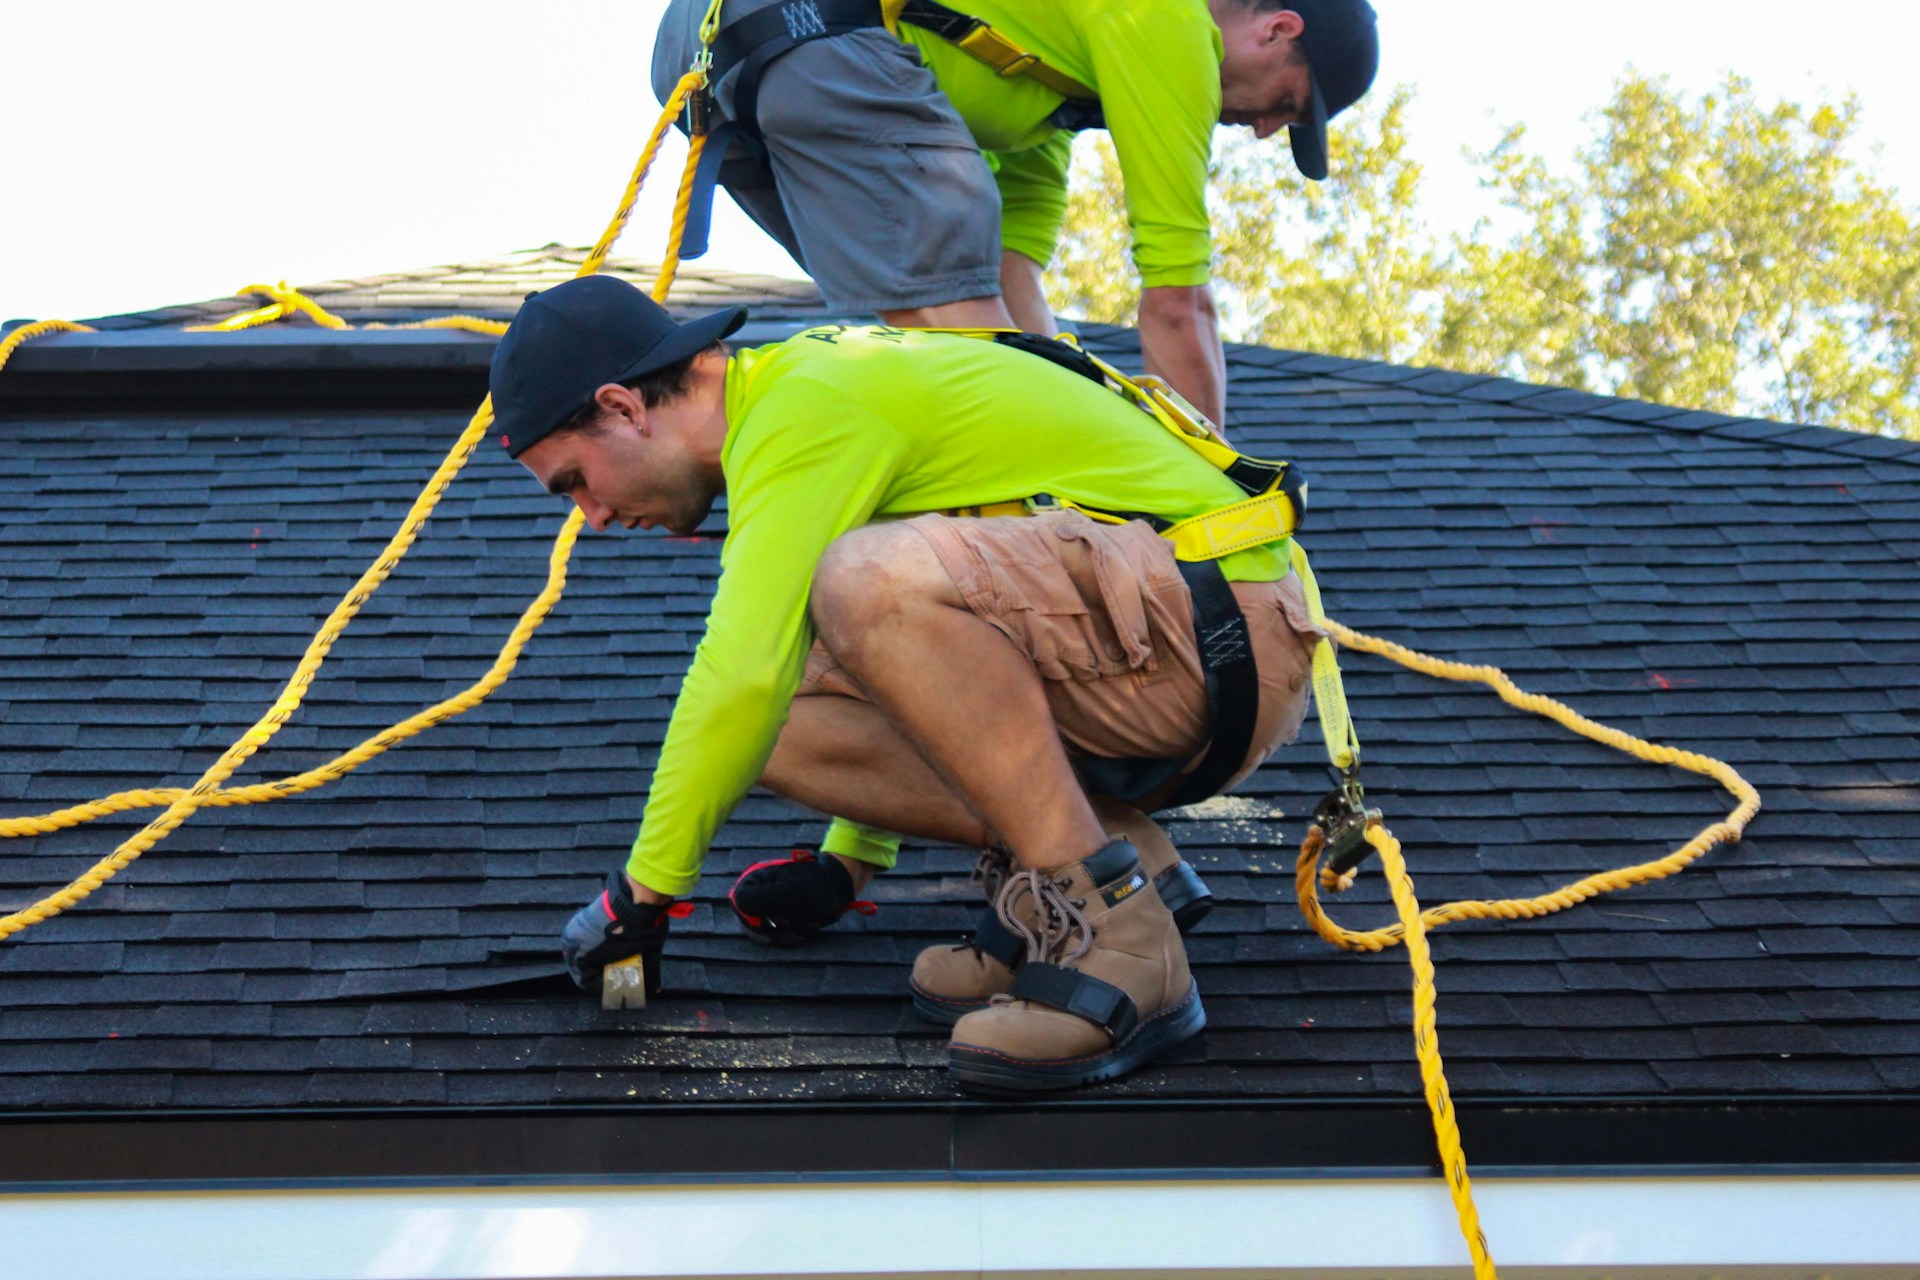 2 people working on a roof